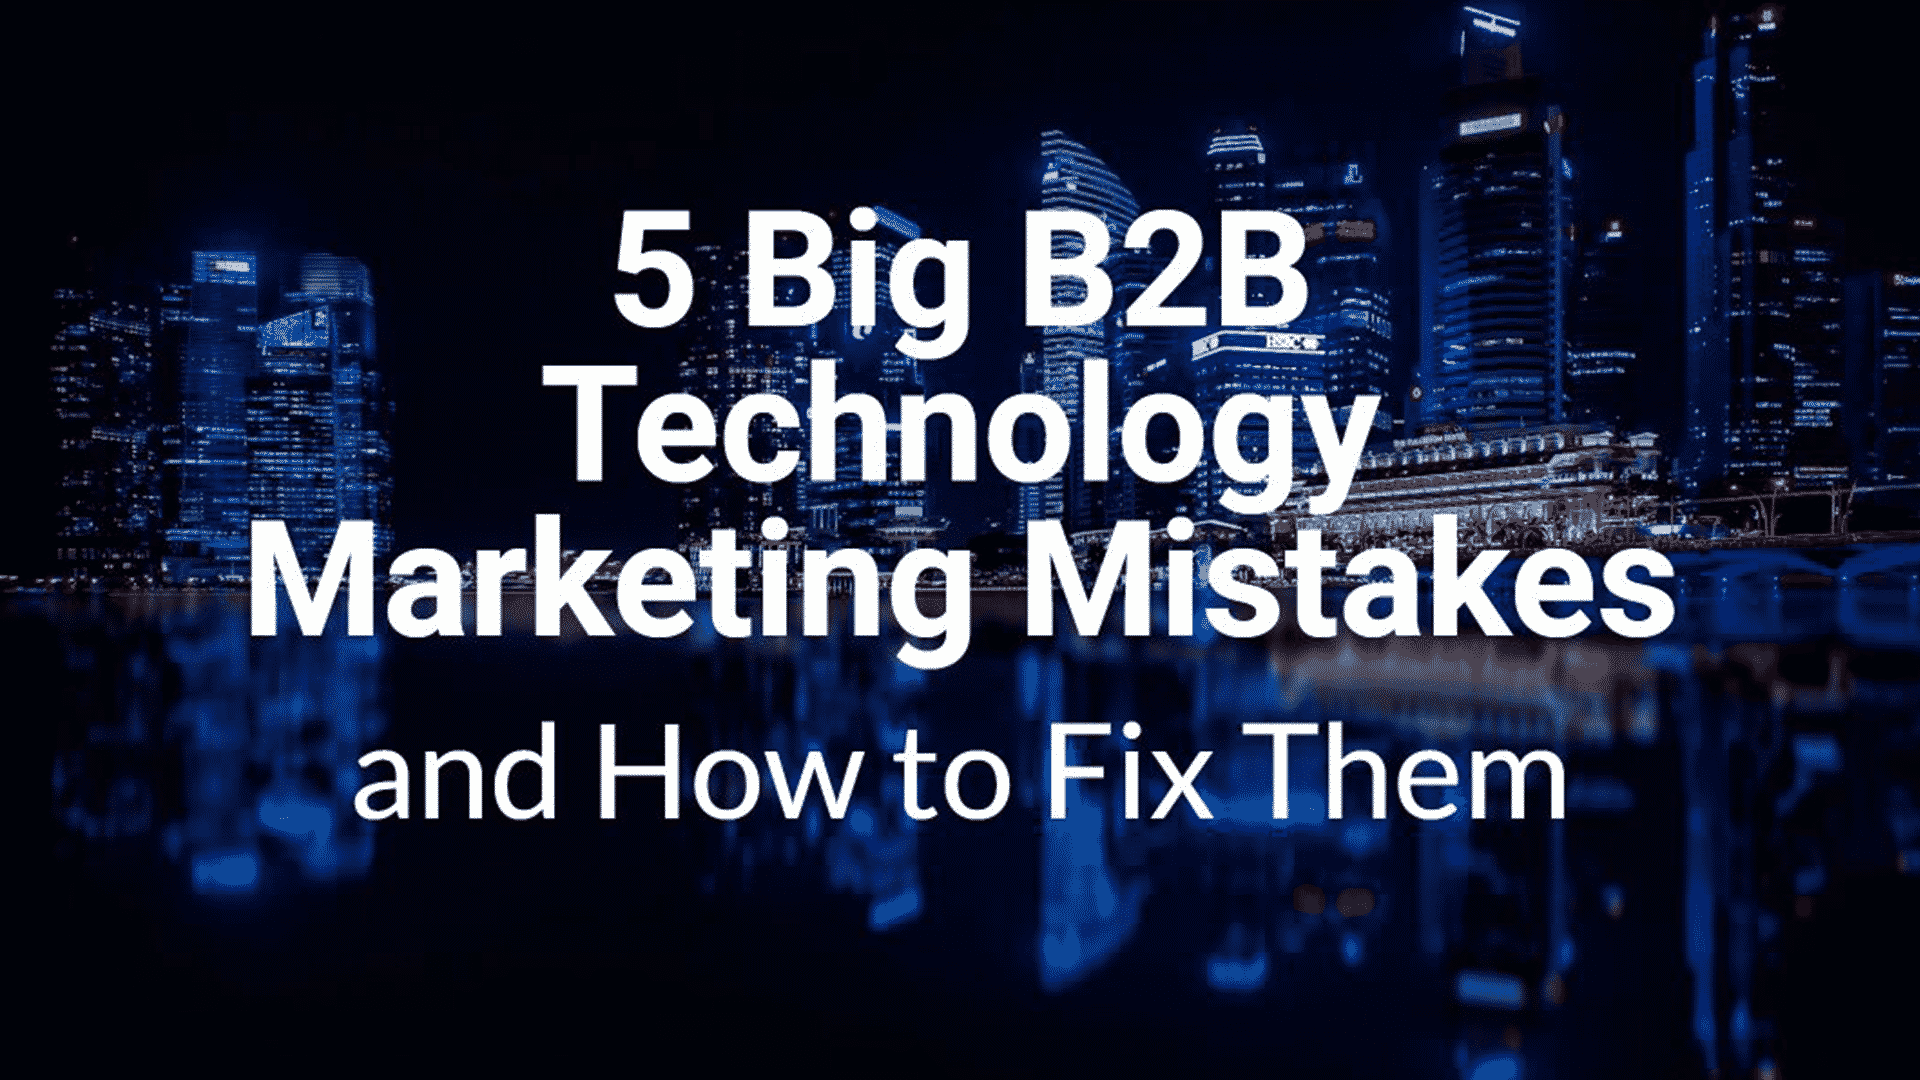 5 big b2b technology marketing mistakes and how to fix them.